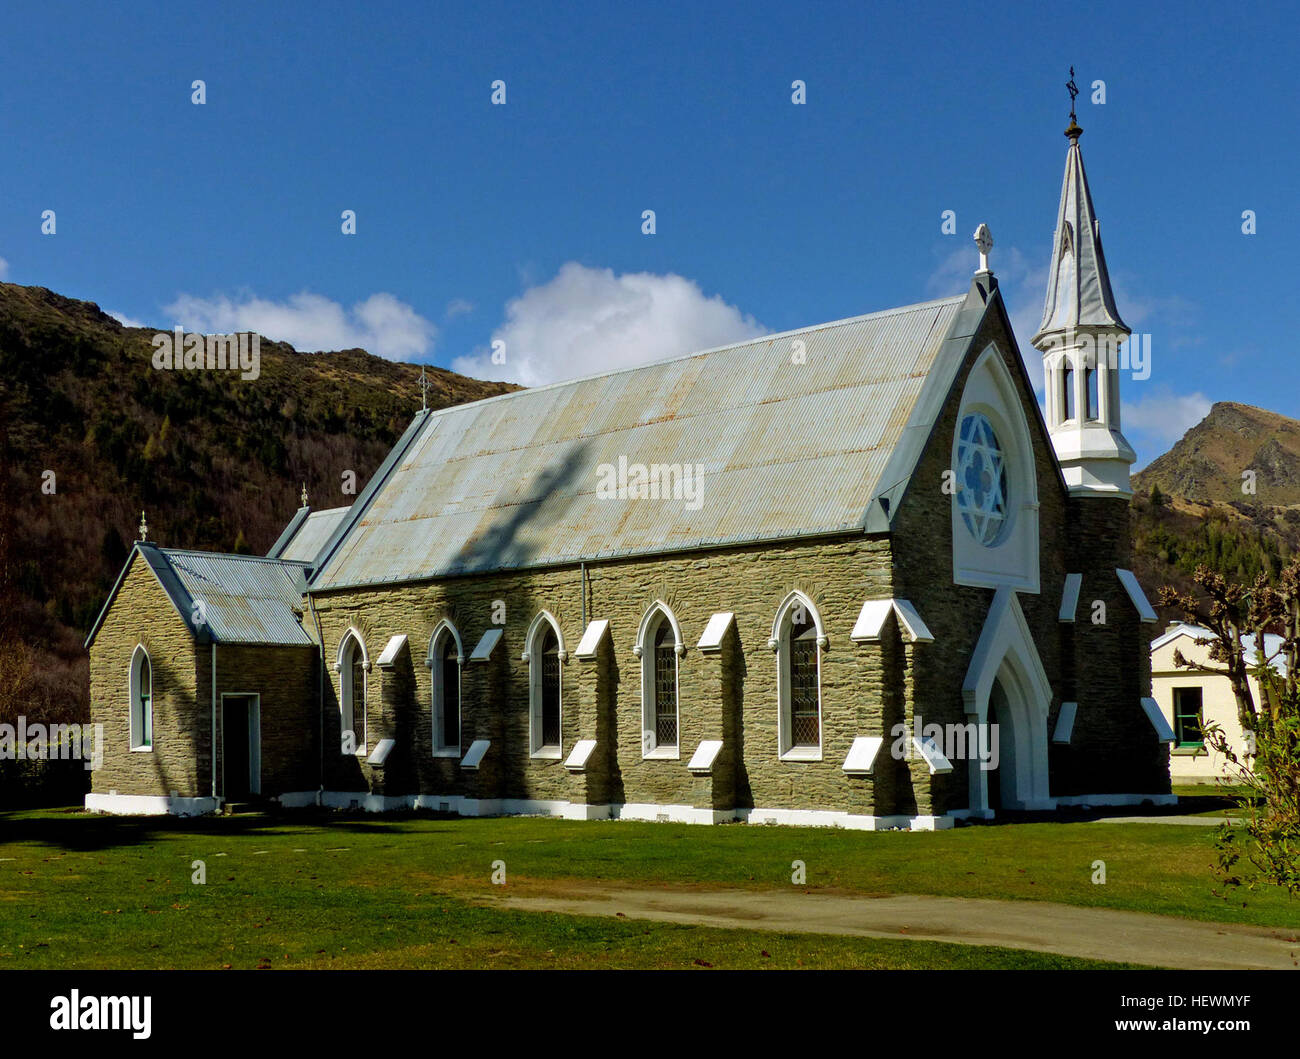 St. Patricks Catholic Church was built in three phases, the main body of the church in 1874, the sanctuary in 1882, and the sacristy in 1902. The stone church is in a Gothic Revival style. The church is included in the St. Joseph Parish in Queenstown.  In the 1897, Mary Helen MacKillop, an Australian nun and founder of the Sisters of St Joseph of the Sacred Heart, visit Arrowtown to help the church with their school. Mary Helen MacKillop, was canonized in 2010 as Saint Mary of the Cross, the first Australian saint.  The church continues as an active church with Mass celebrated on the 1st, 3rd  Stock Photo